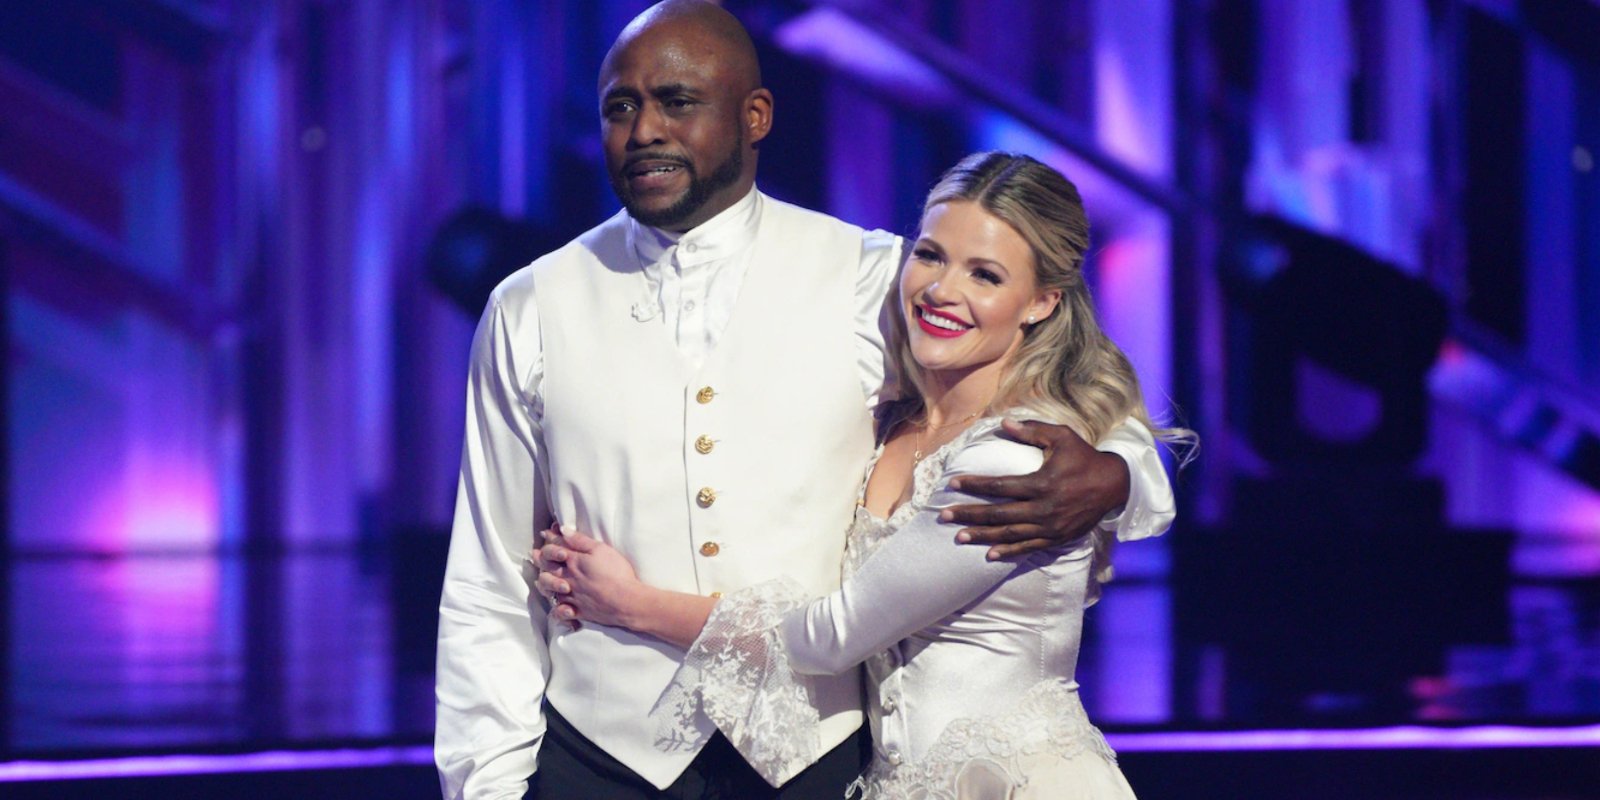 Wayne Brady and Witney Carson during Disney+ night on 'Dancing with the Stars.'